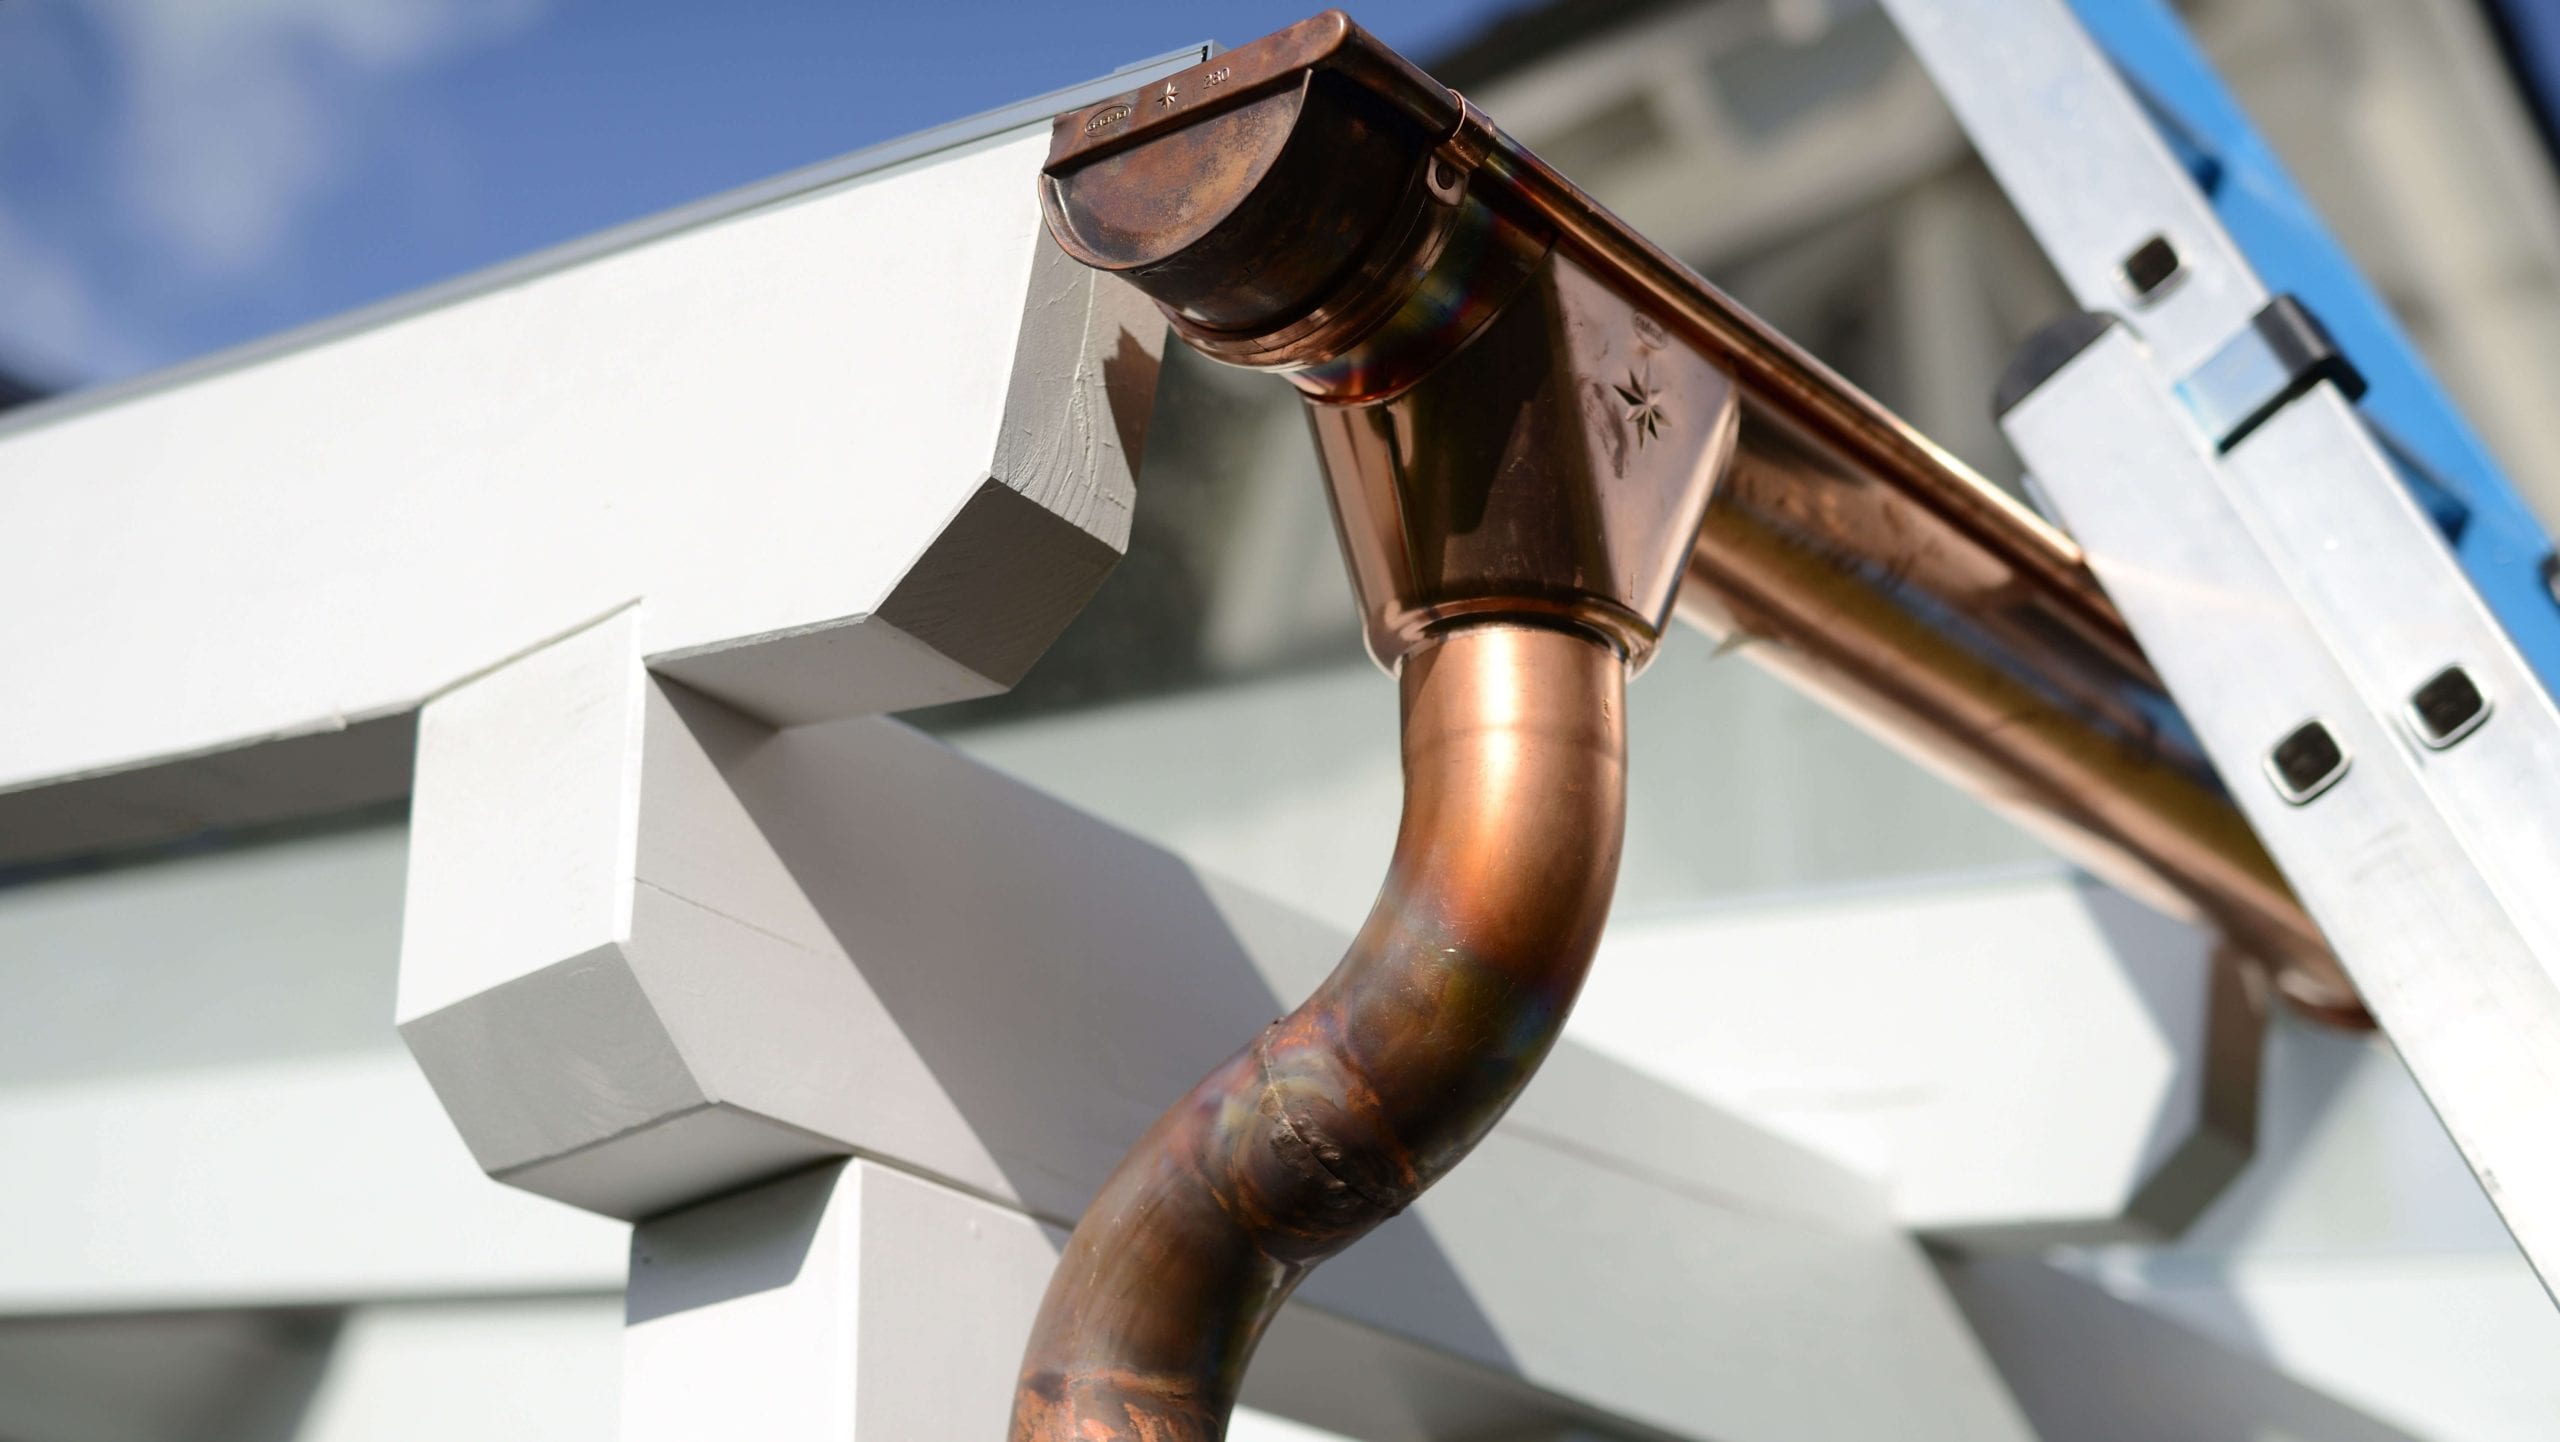 Make your property stand out with copper gutters. Contact for gutter installation in Melbourne